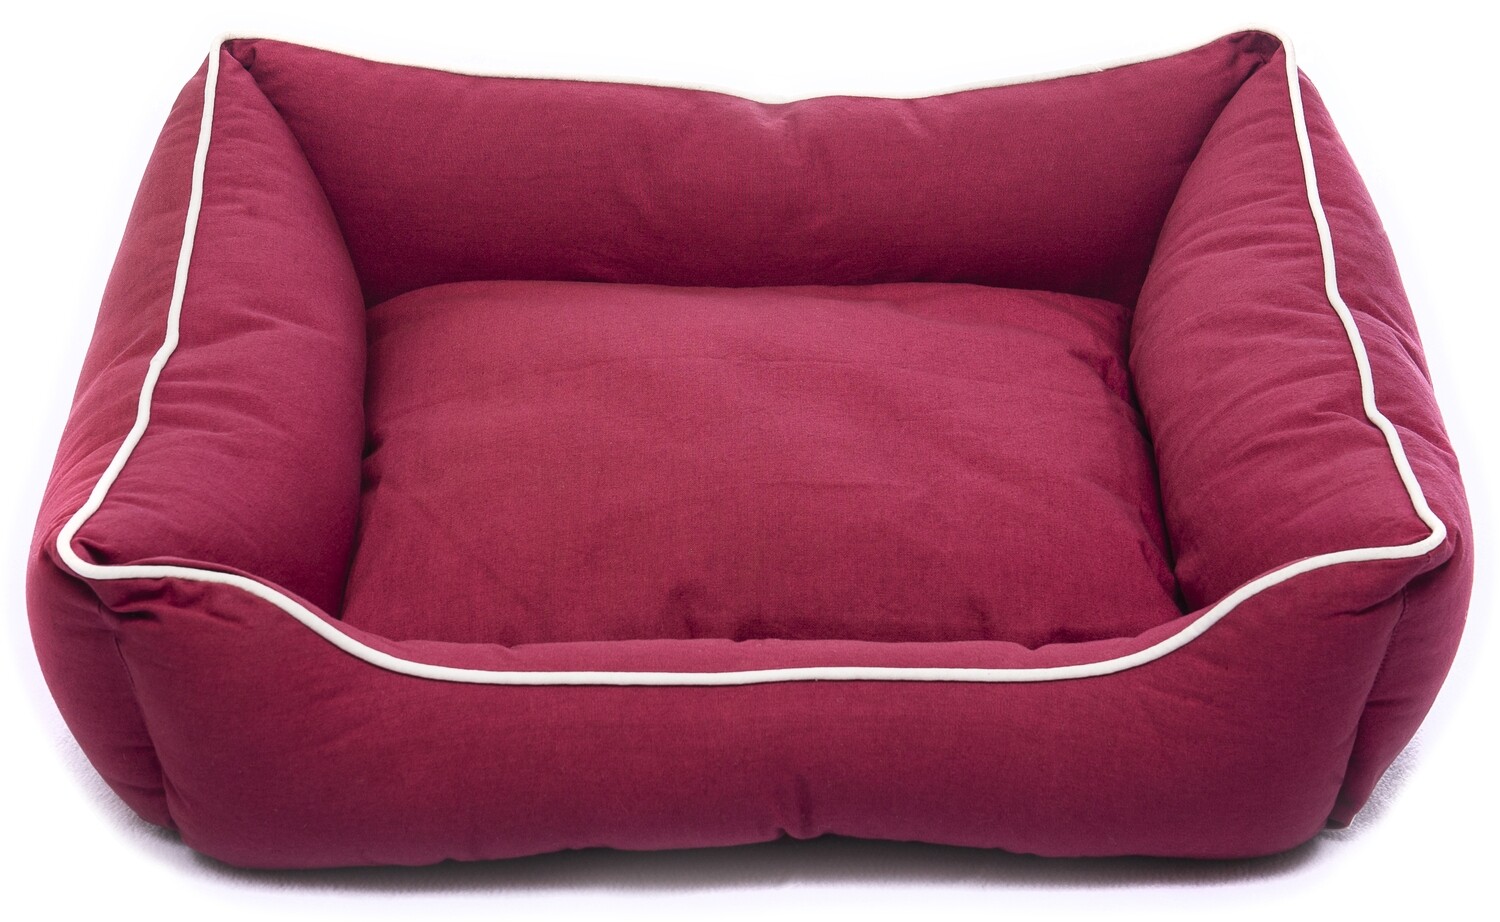 DGS Lounger Bed X Small - Berry